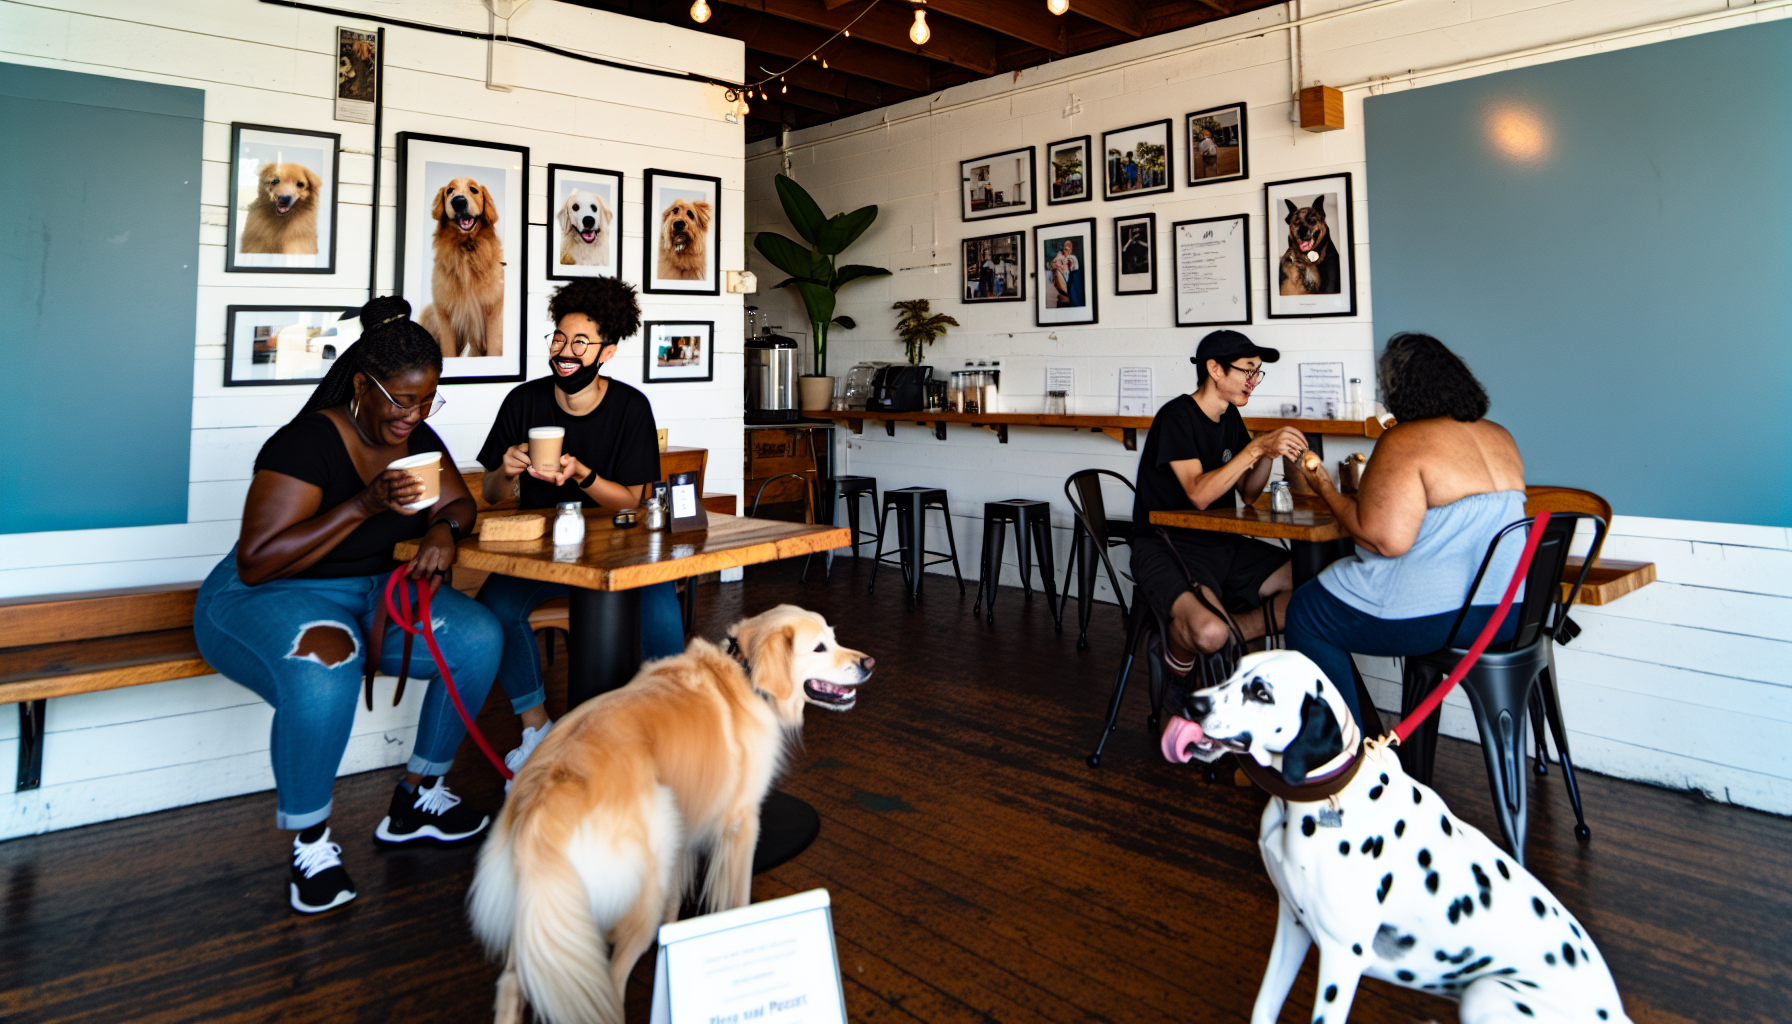 Cozy pet-friendly cafe in East Austin with dogs and owners socializing